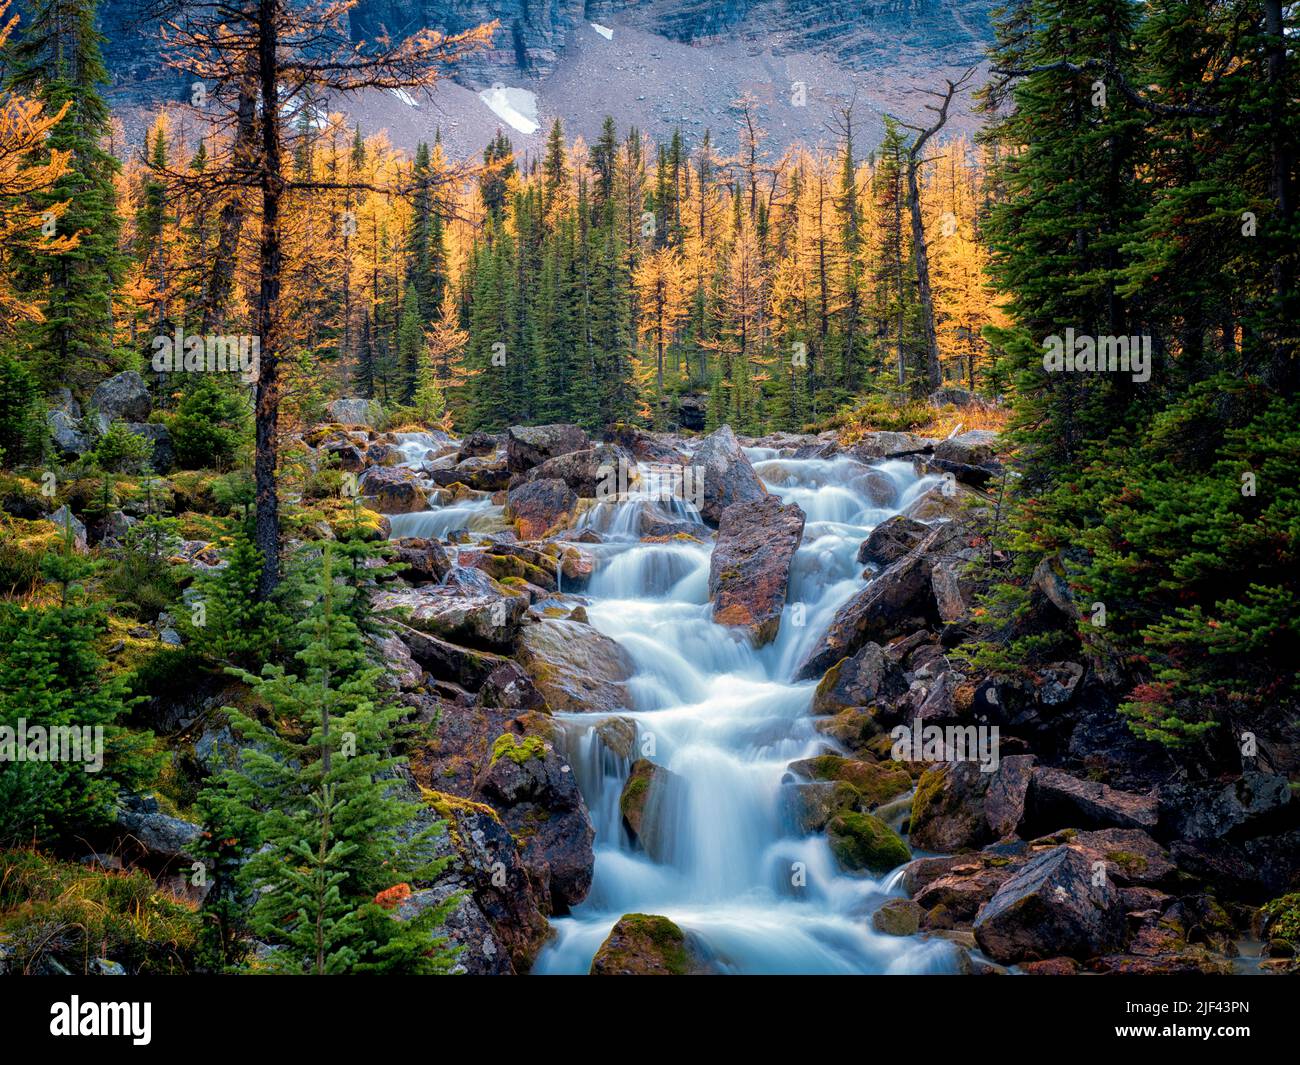 Stream flows from the Opabin Plateau past fall colored larch trees. Yoho National Park, Opabin Plateau, British Columbia, Canada Stock Photo